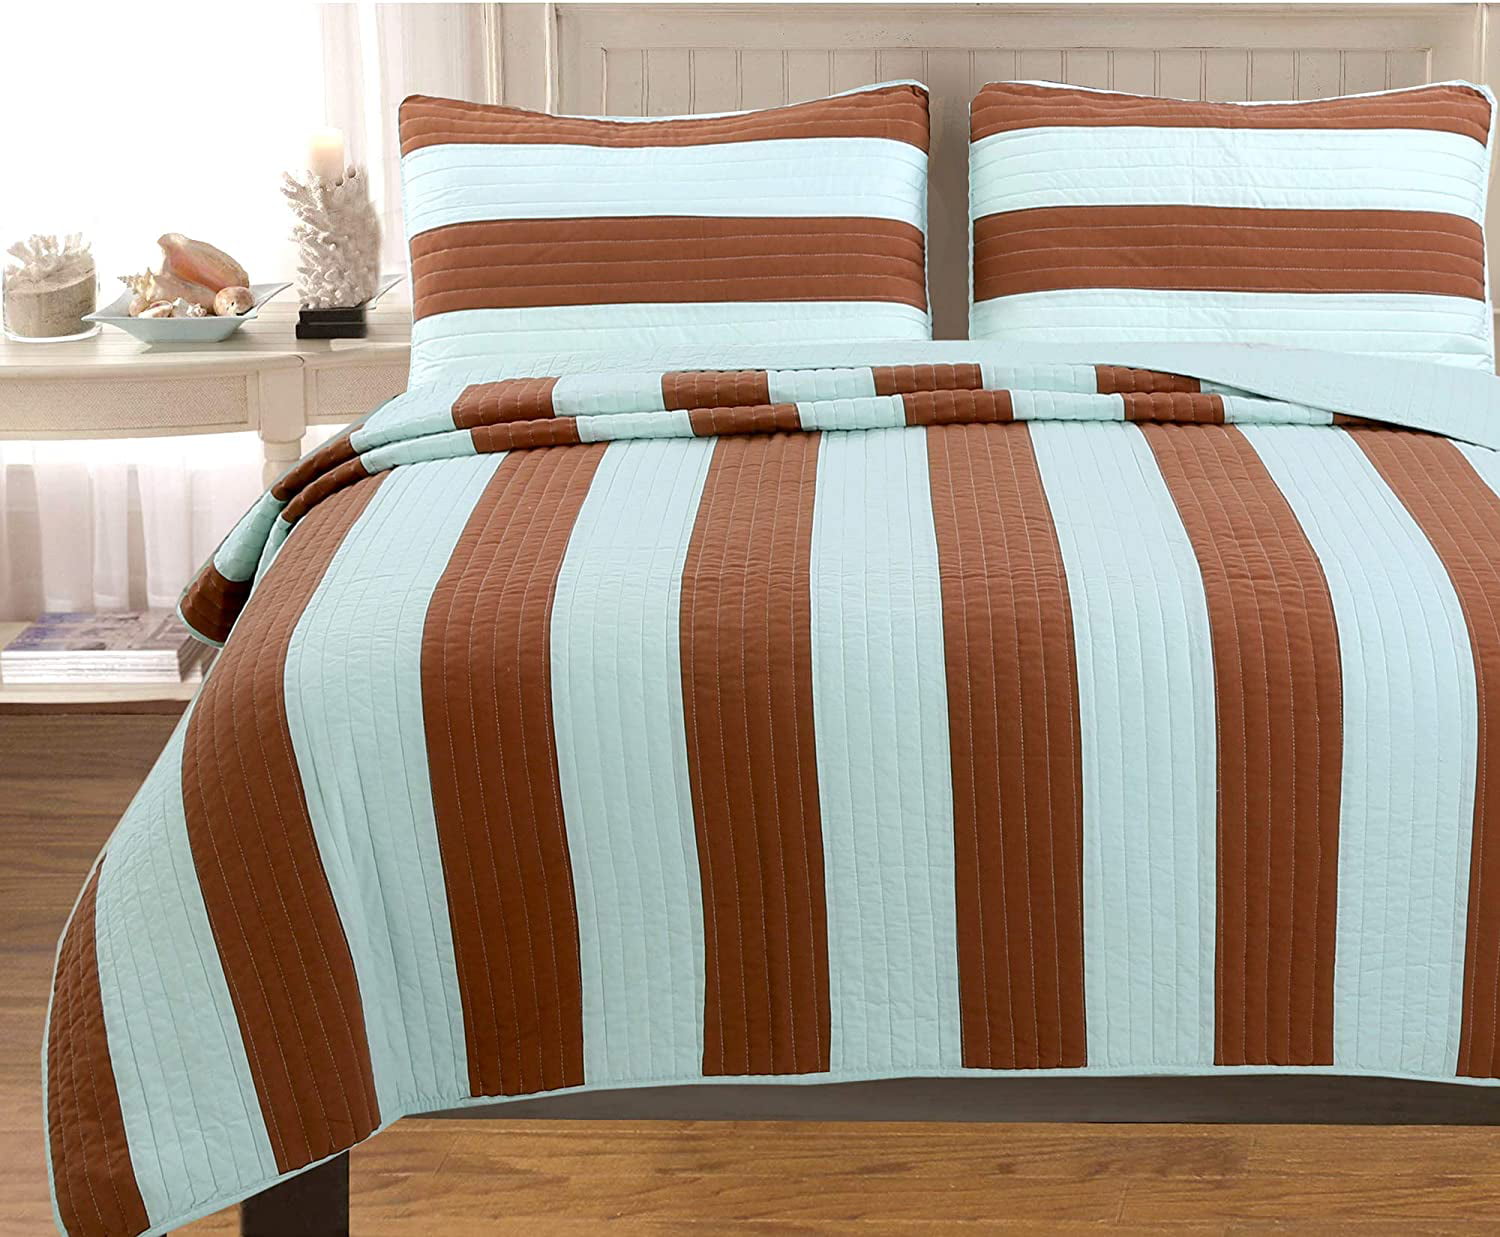 ~ COZY LODGE GREY BLUE NAVY RED WHITE PLAID SPORTS NAUTICAL COMFORTER SET Details about   NEW 